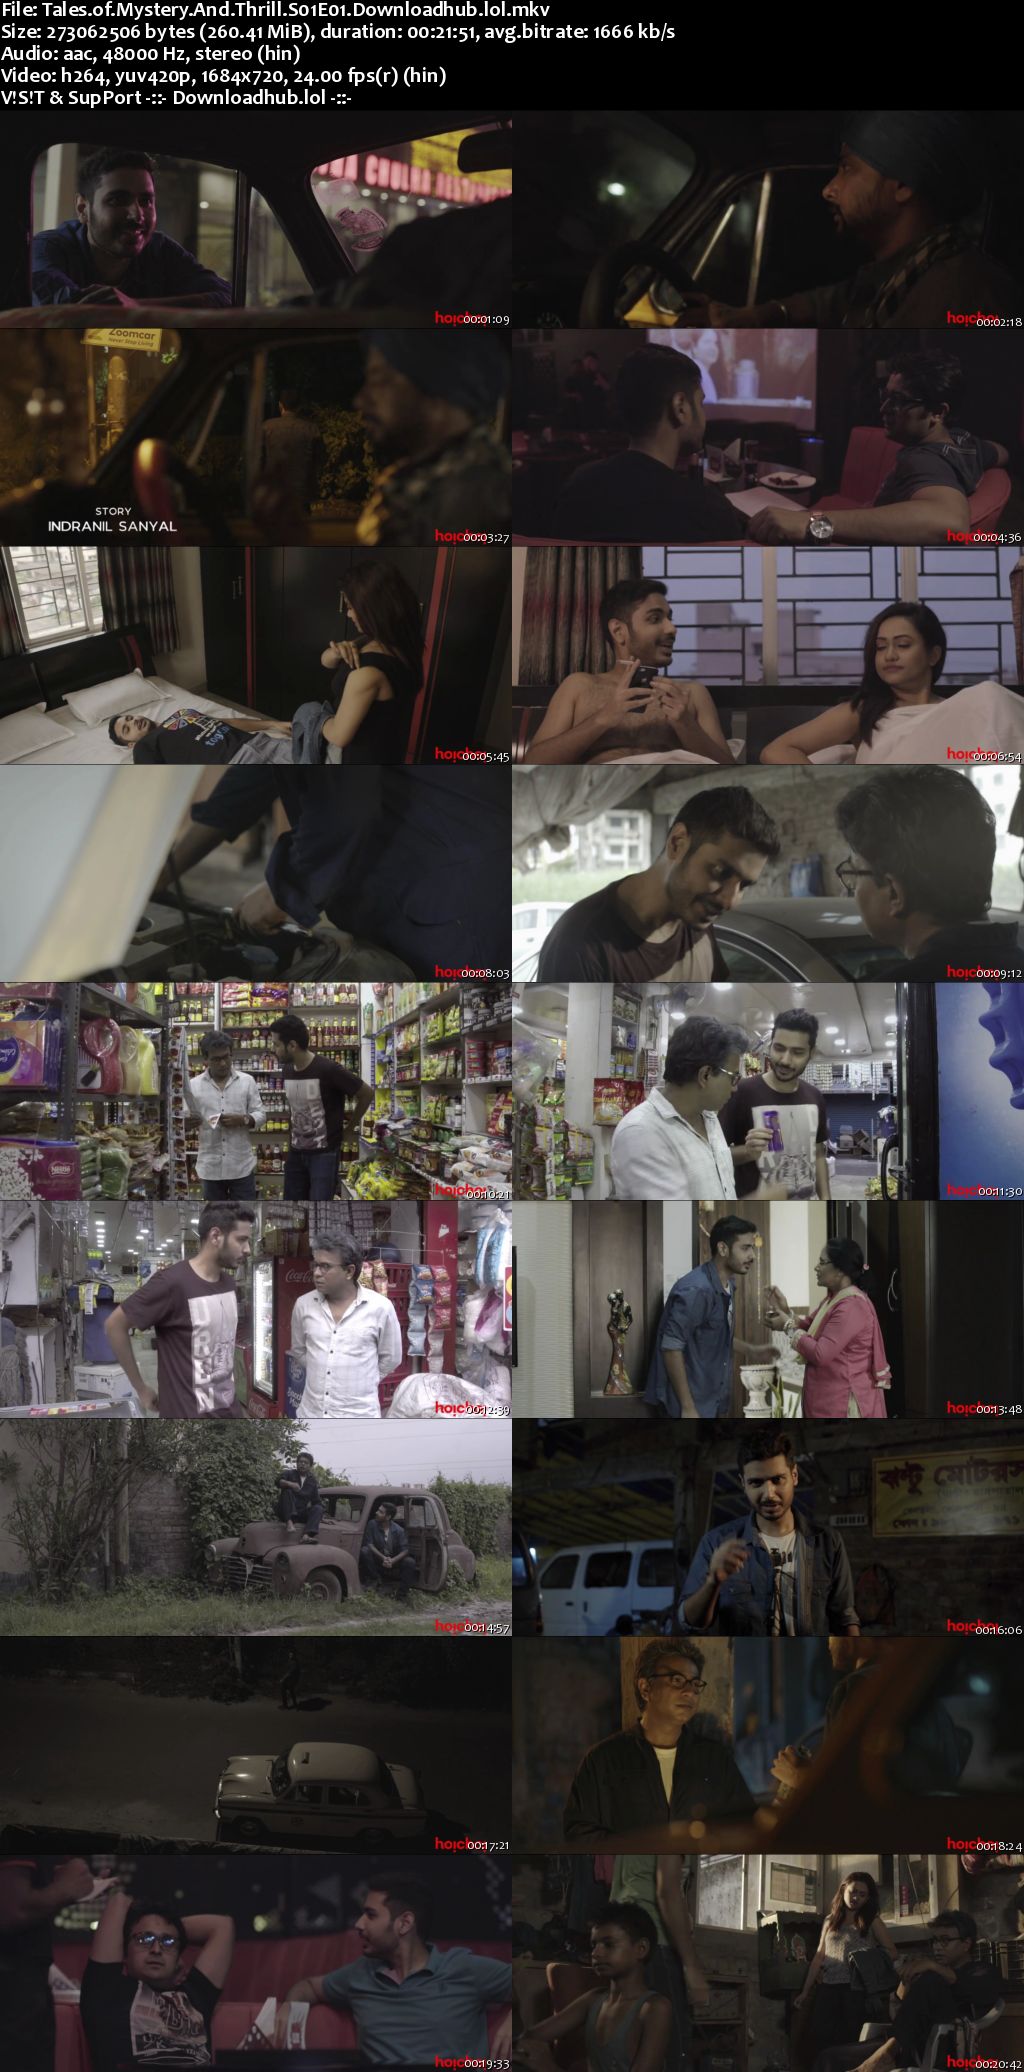 Tales of Mystery And Thrill 2019 Hindi Season 01 Complete 720p HDRip x264